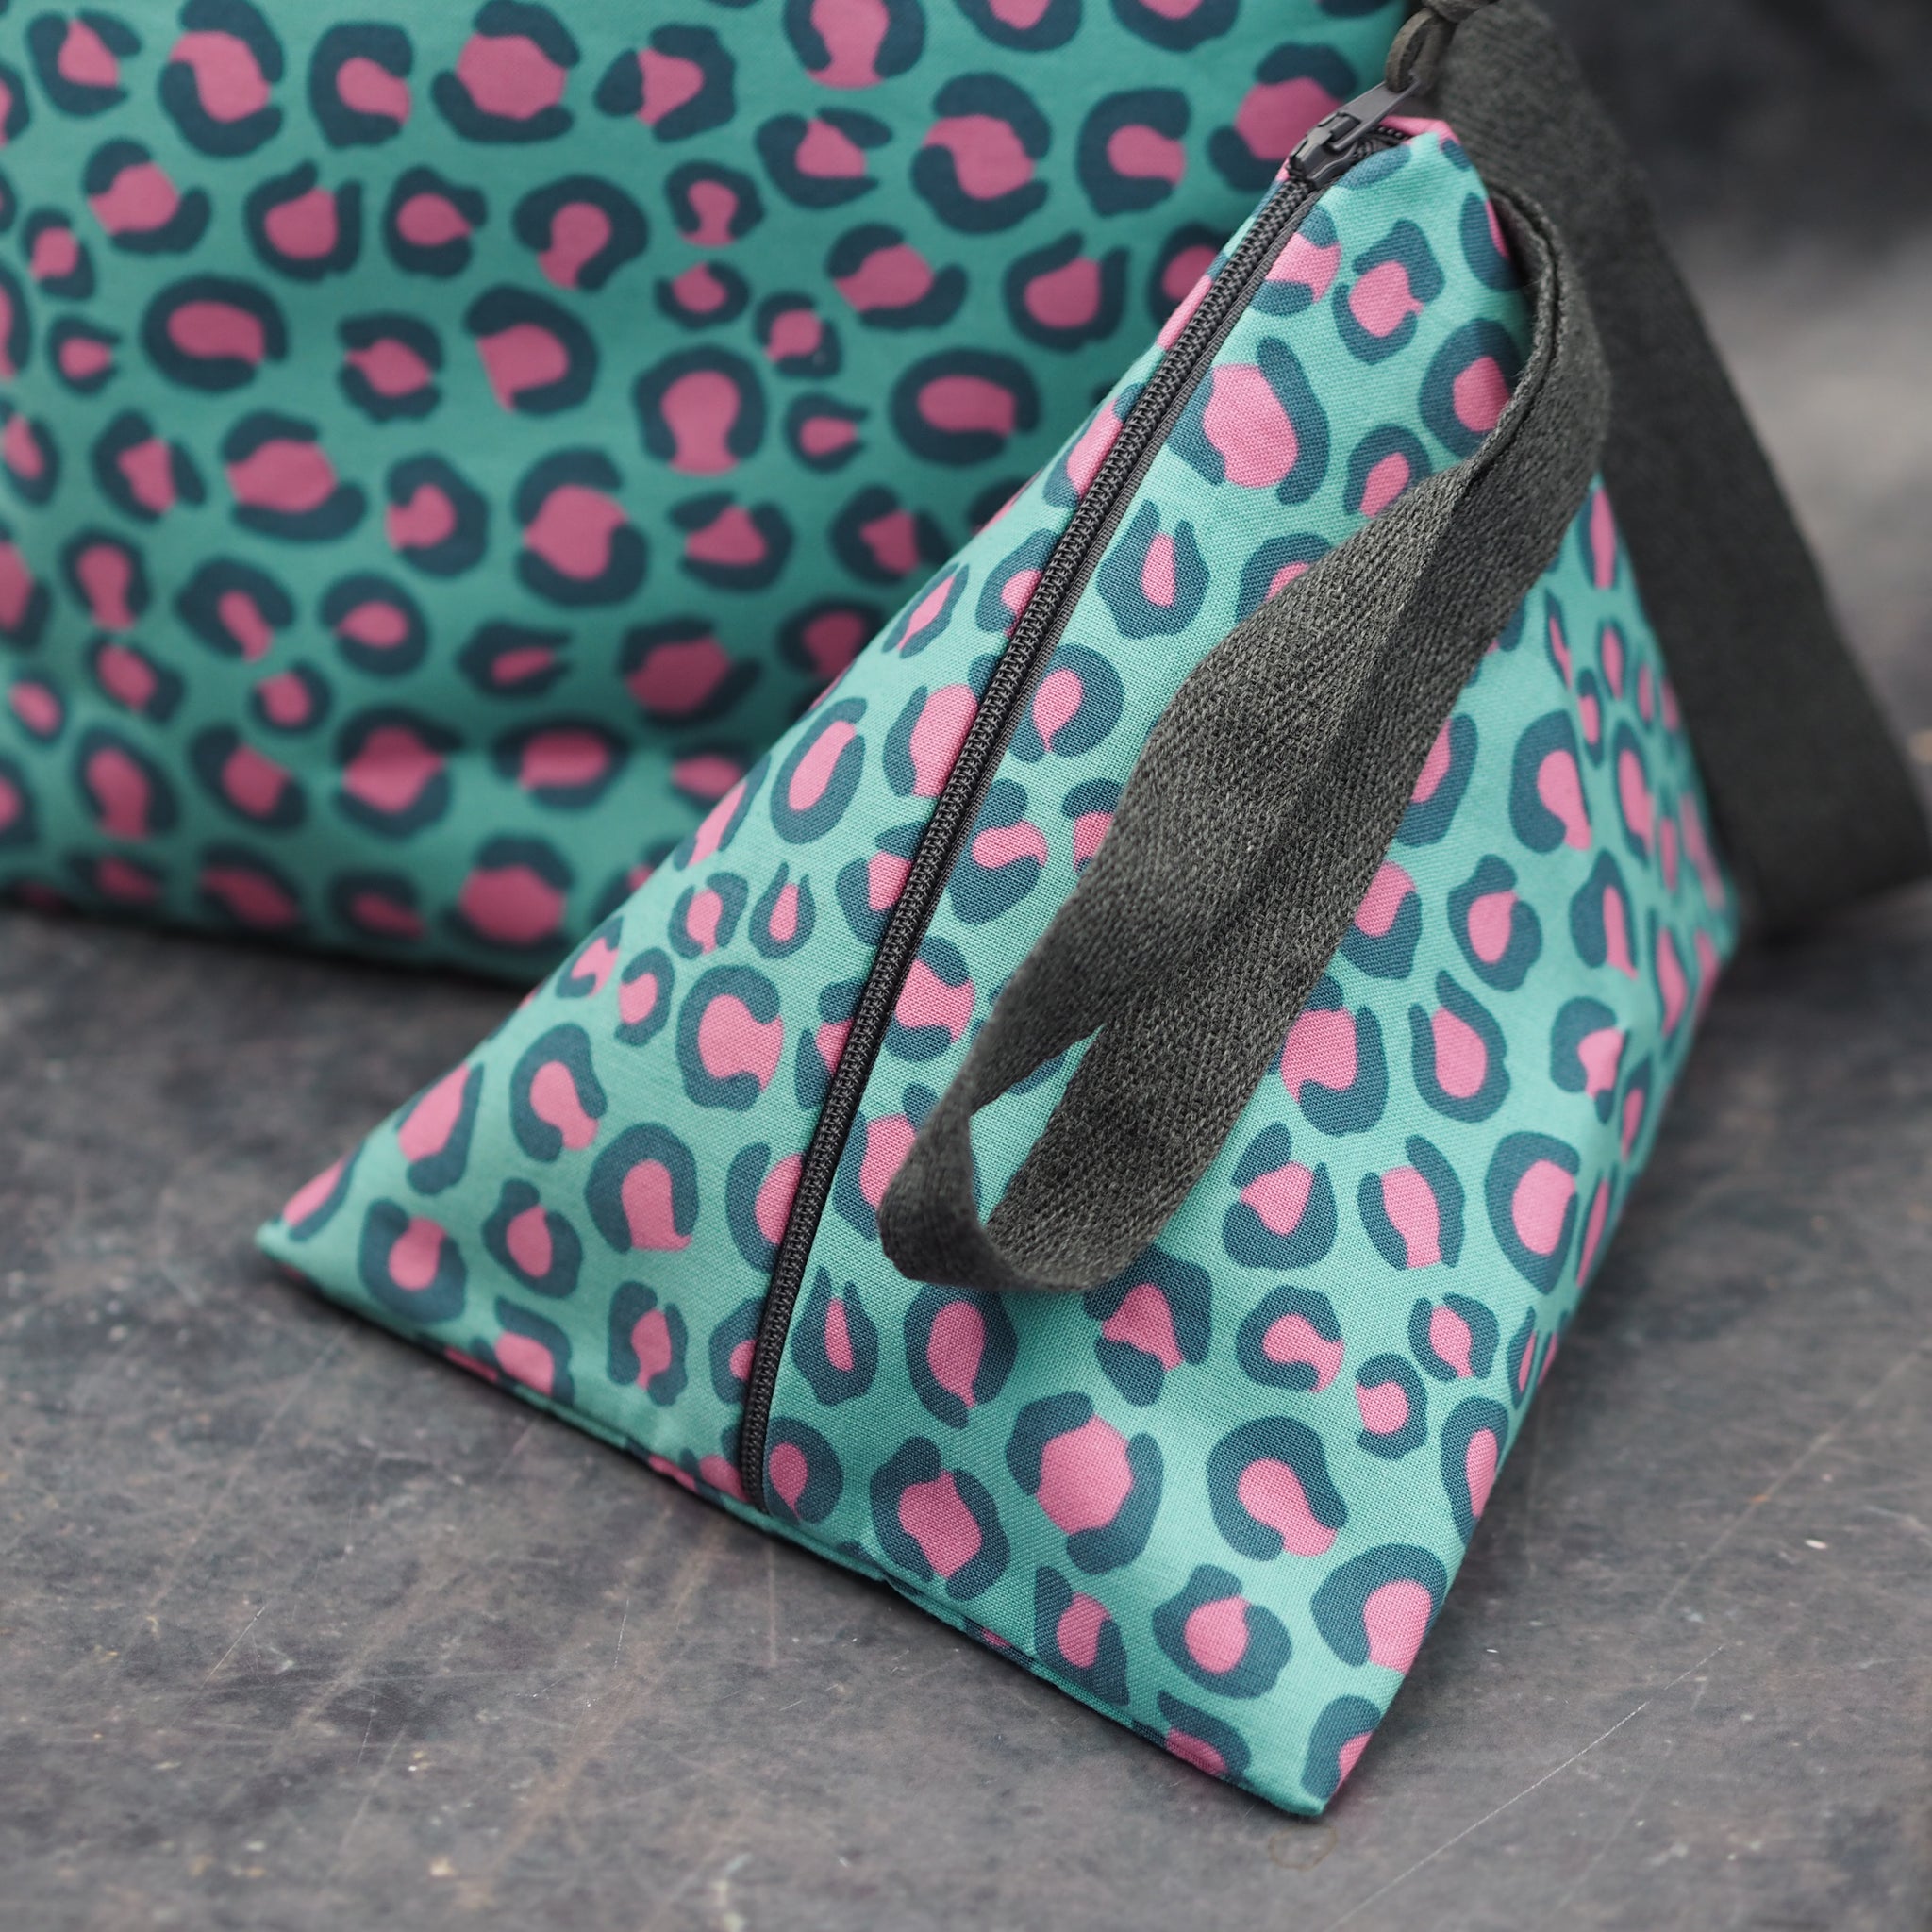 Turquoise Leopard Print - Handmade Cotton Project Bags